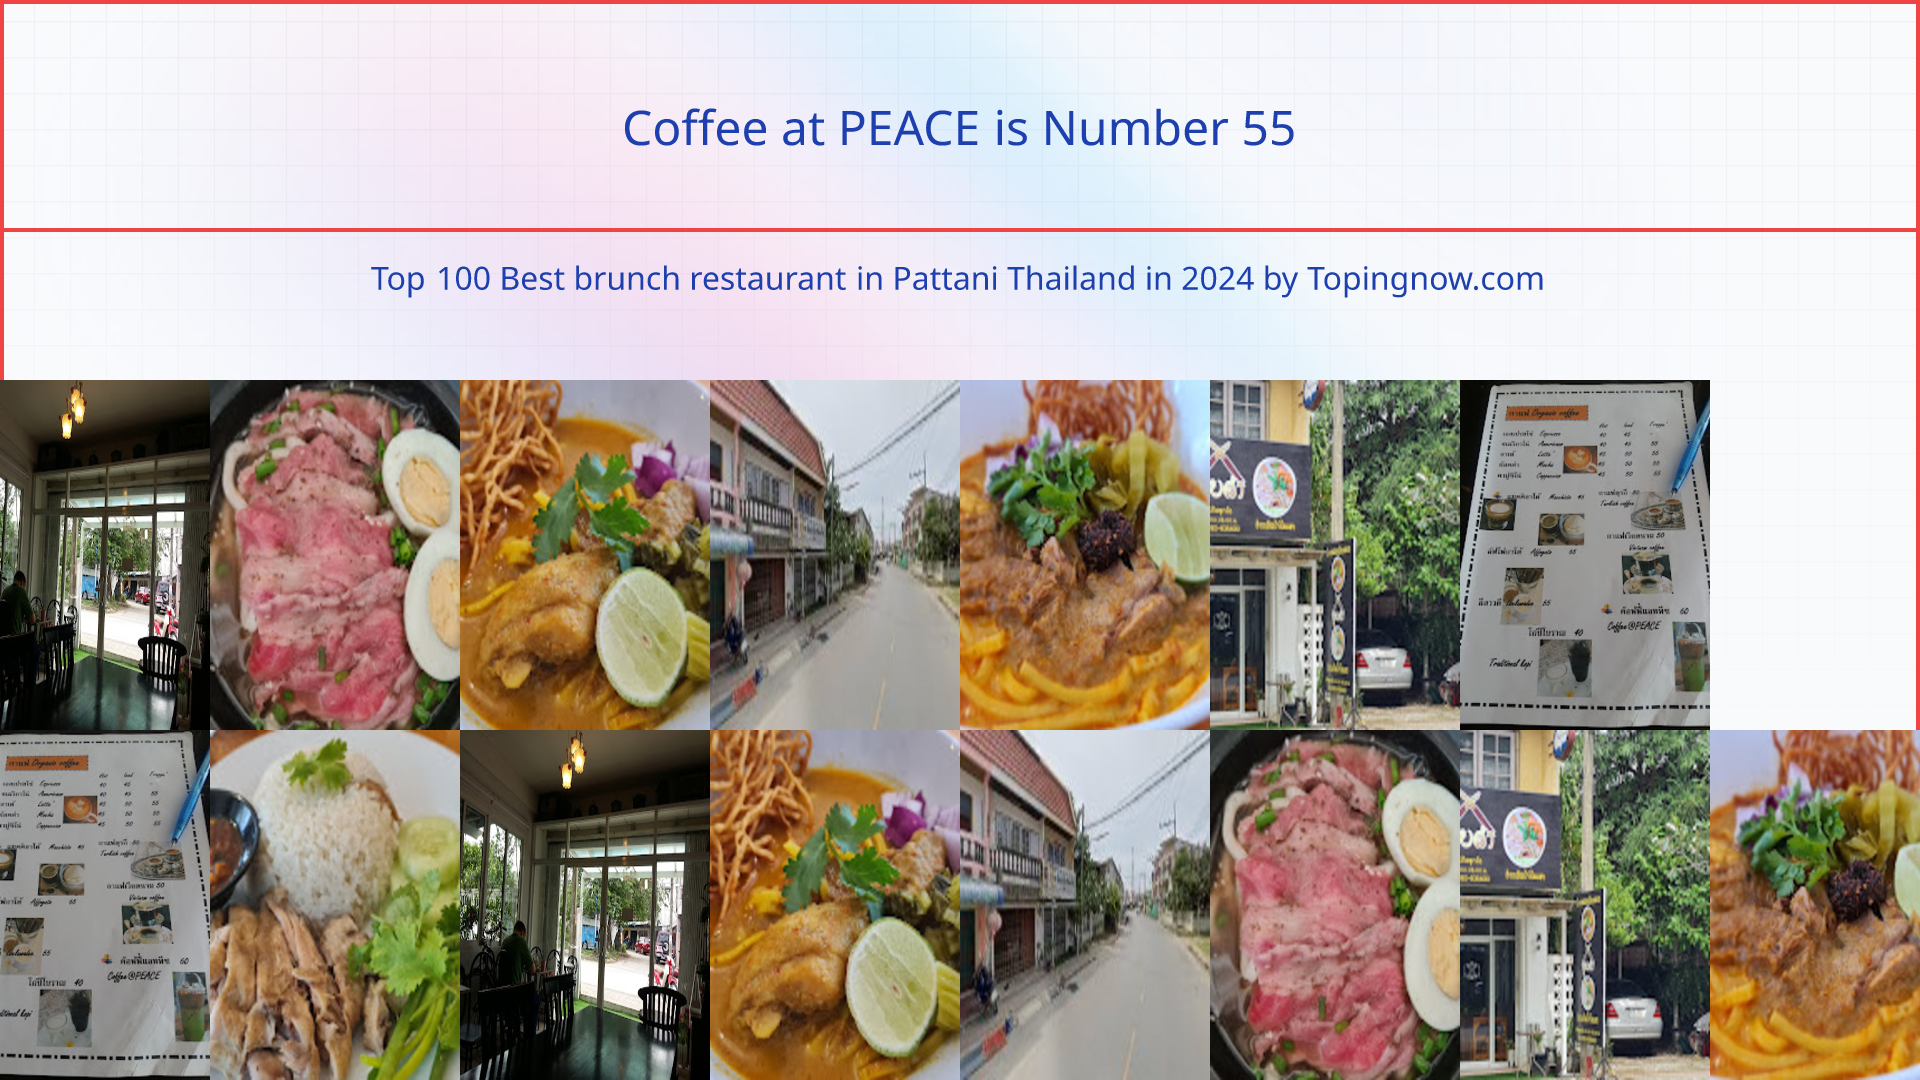 Coffee at PEACE: Top 100 Best brunch restaurant in Pattani Thailand in 2024